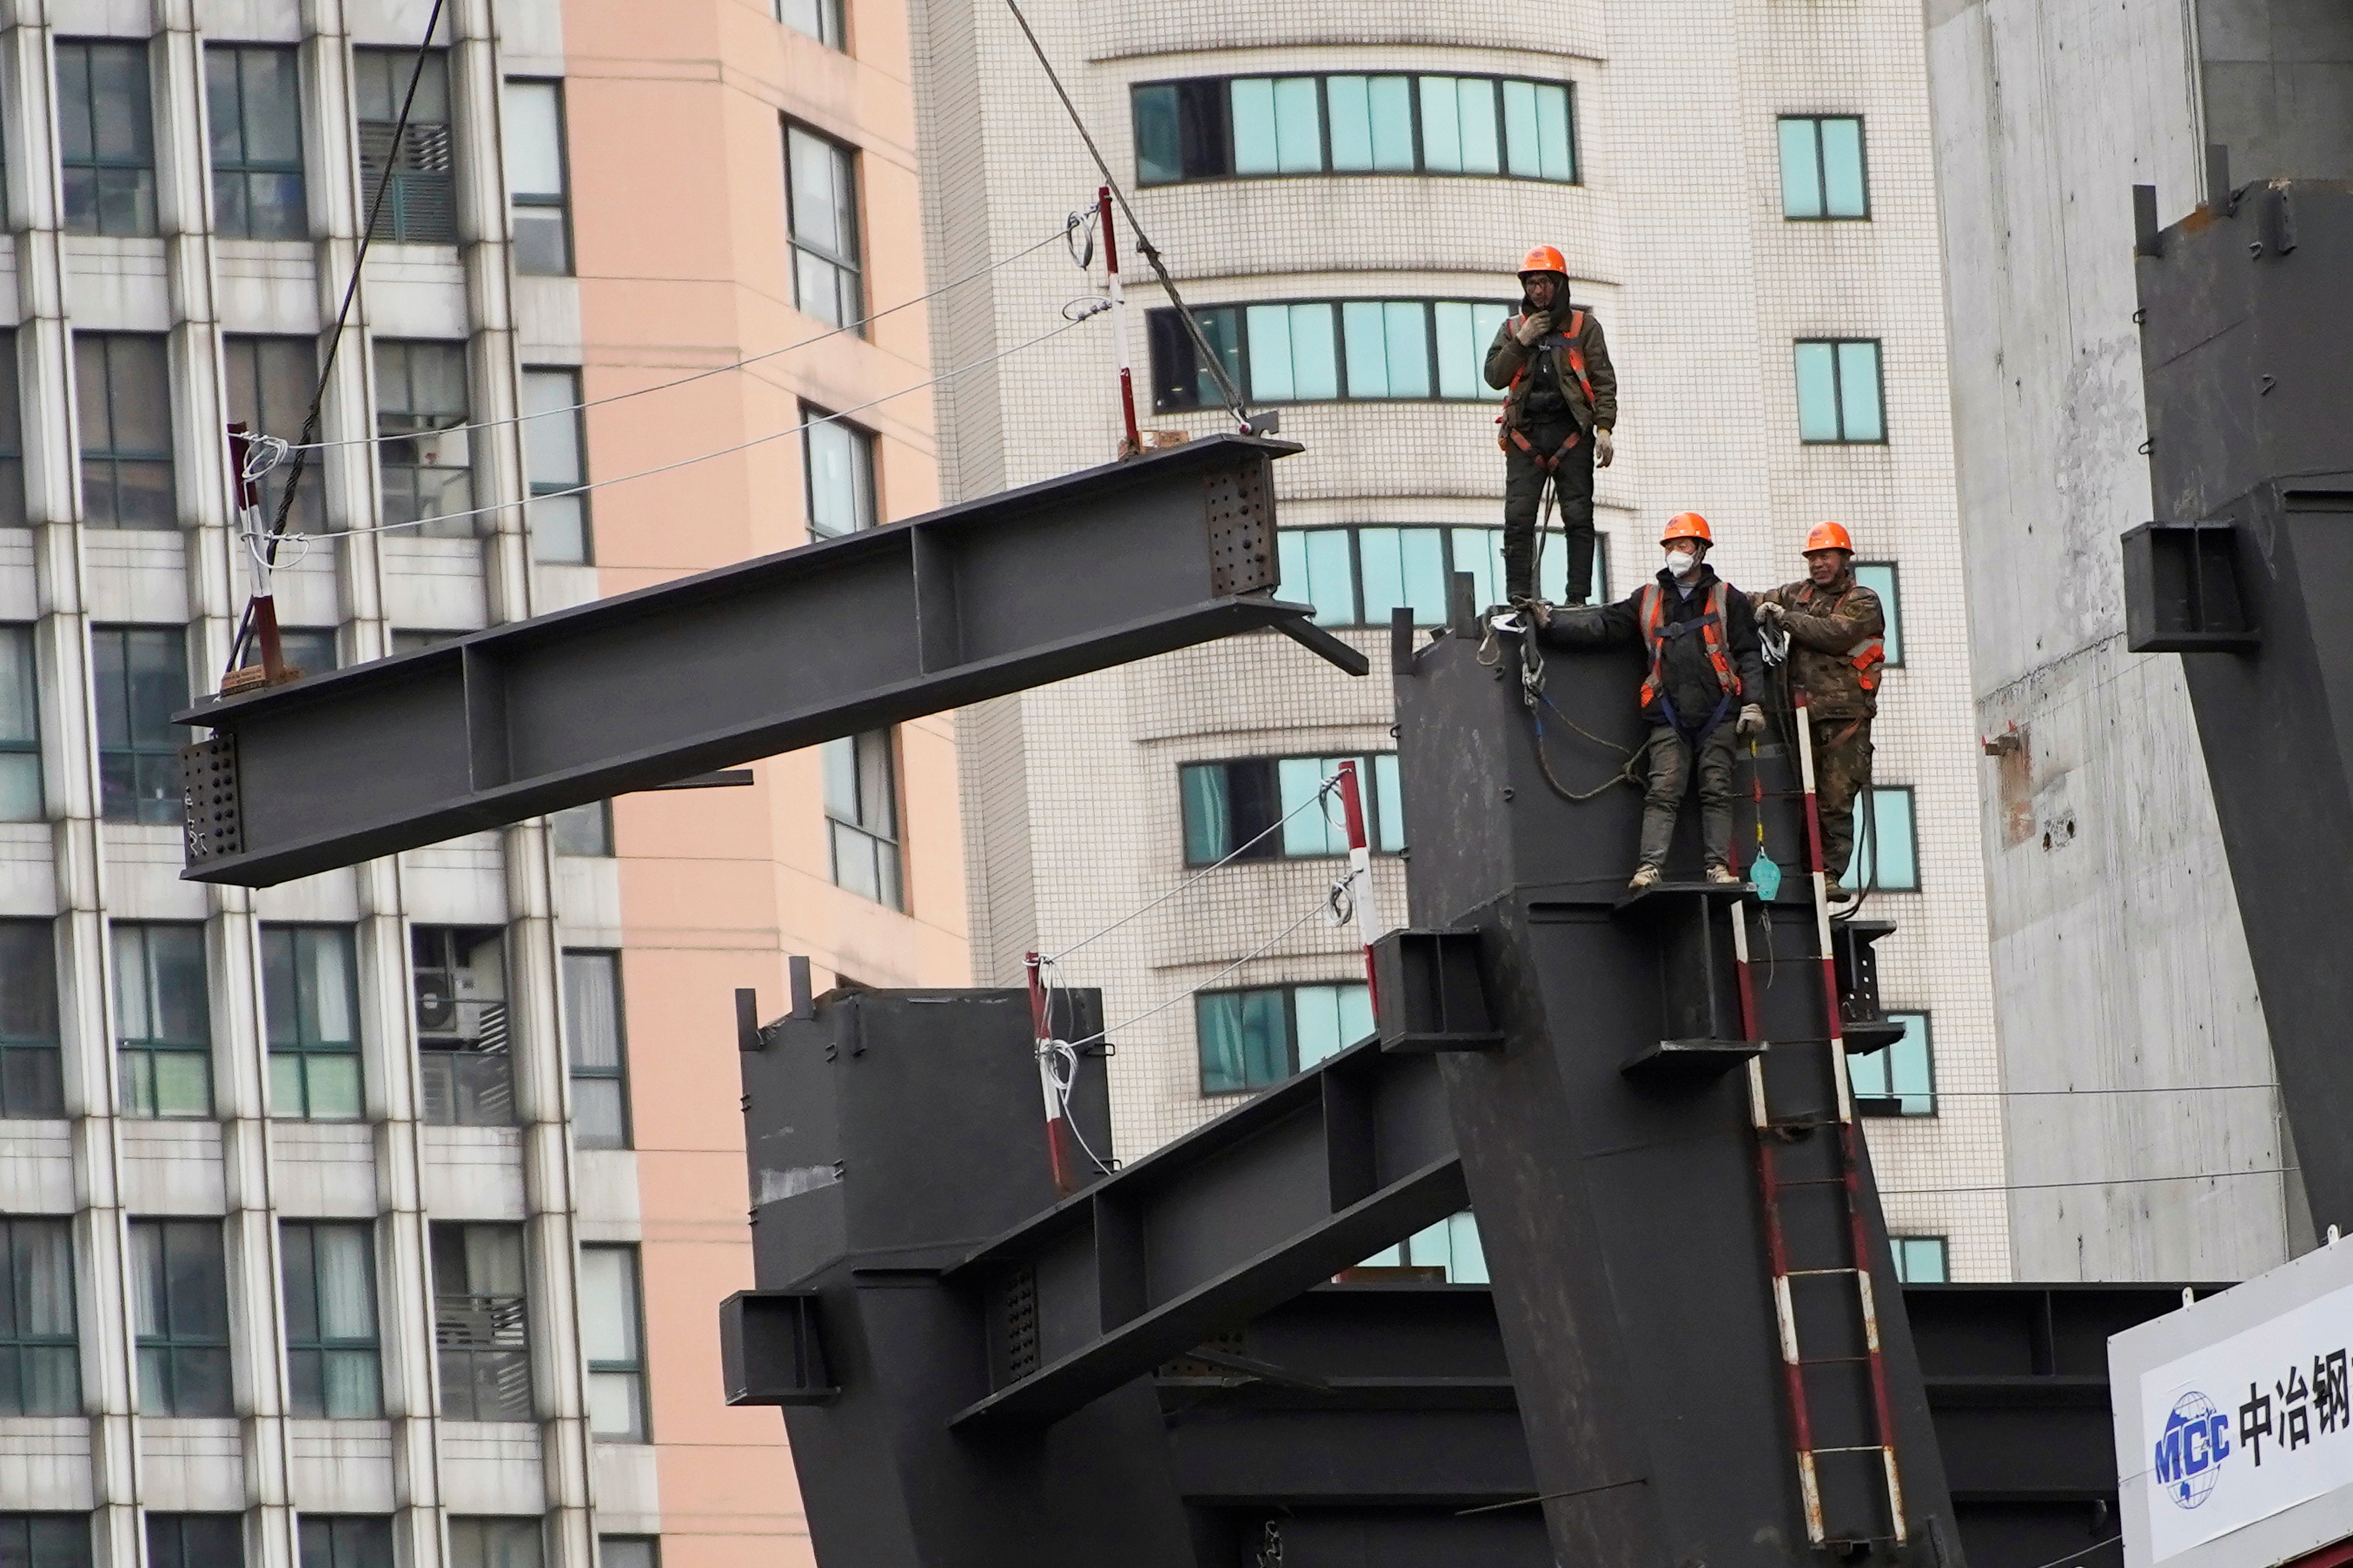 Workers watch as a crane lifts a structure at a construction site in Shanghai